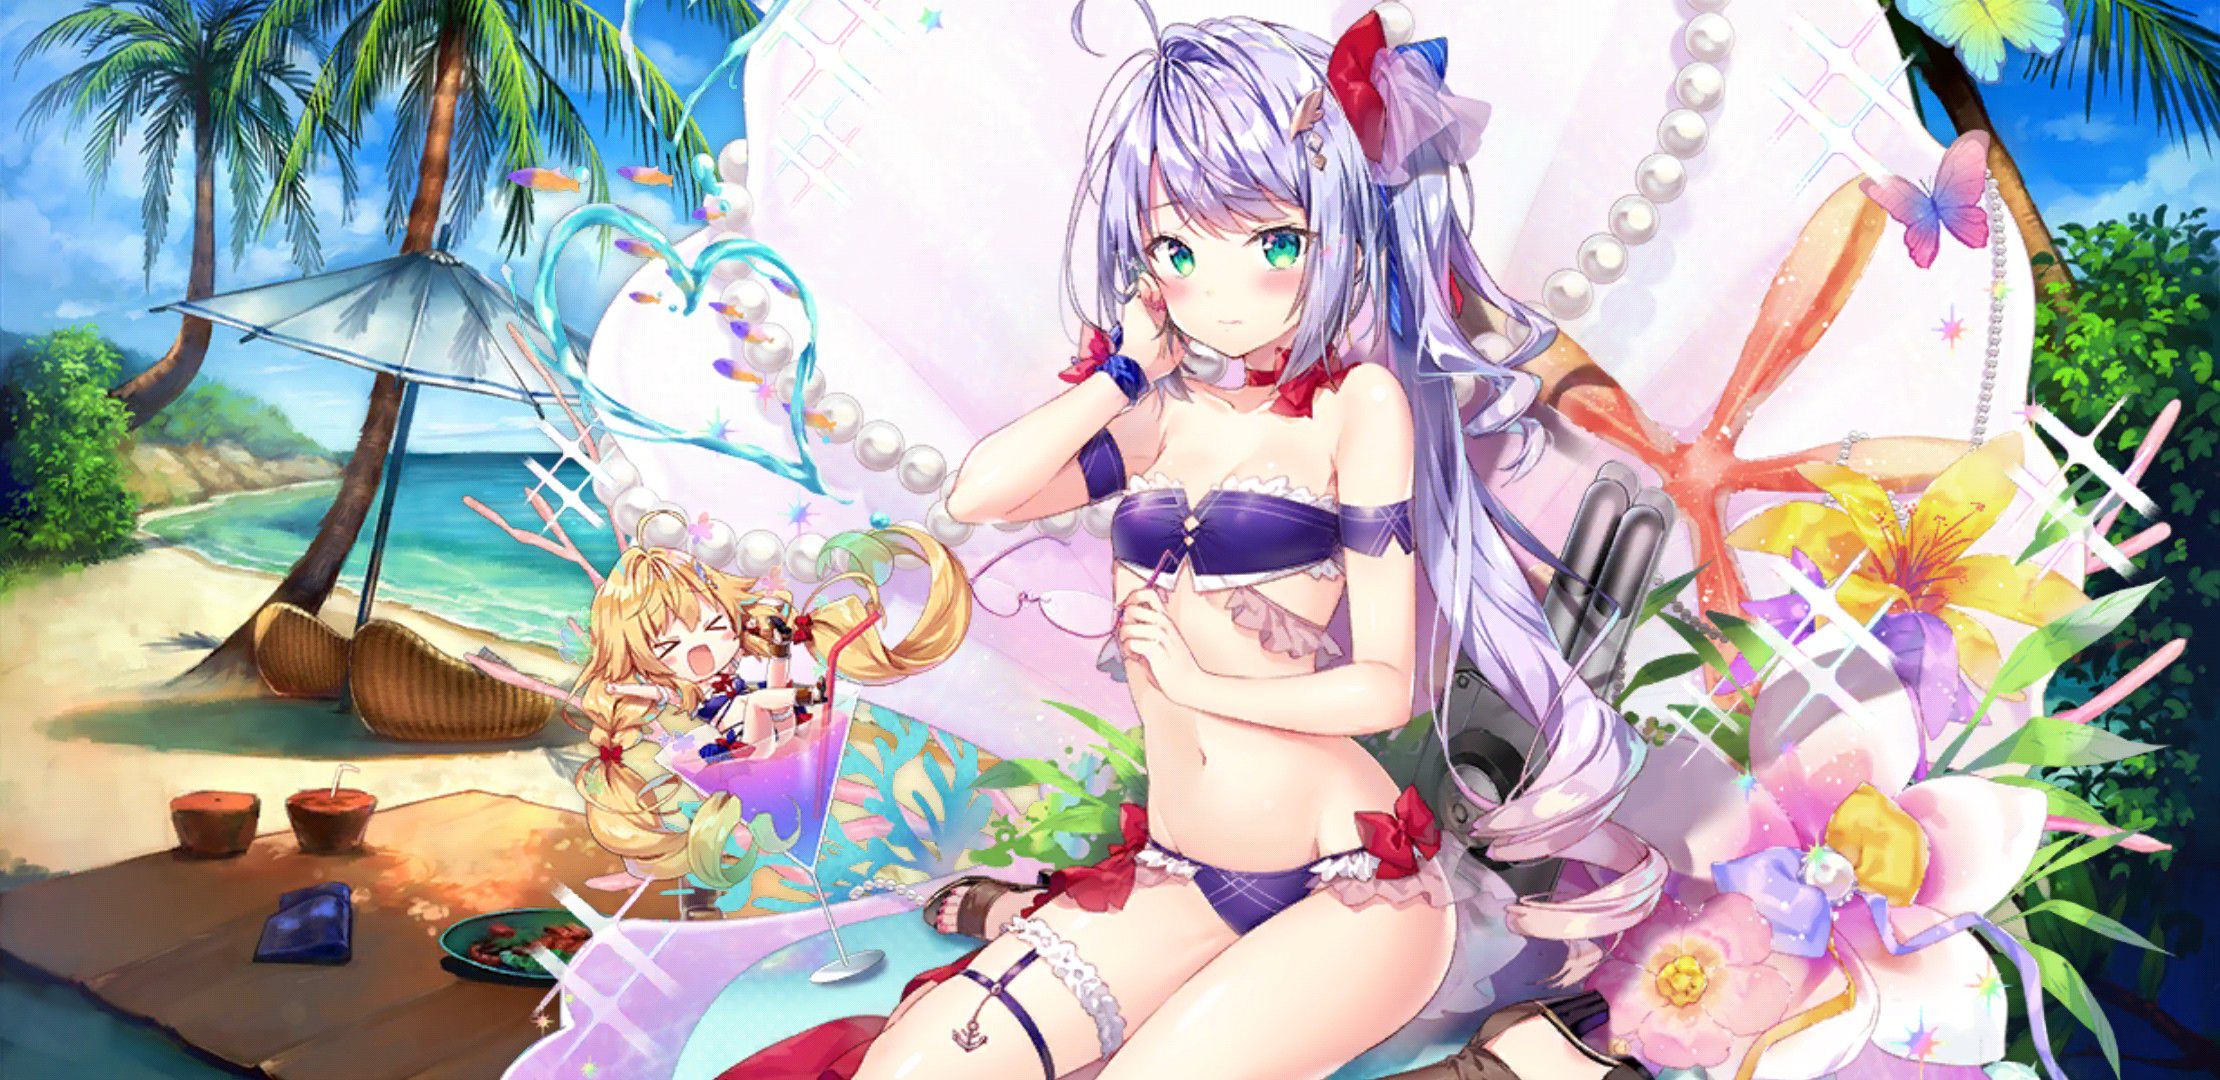 【There is an image】 Smartphone that urges charging with erotic swimsuits is malicious 37